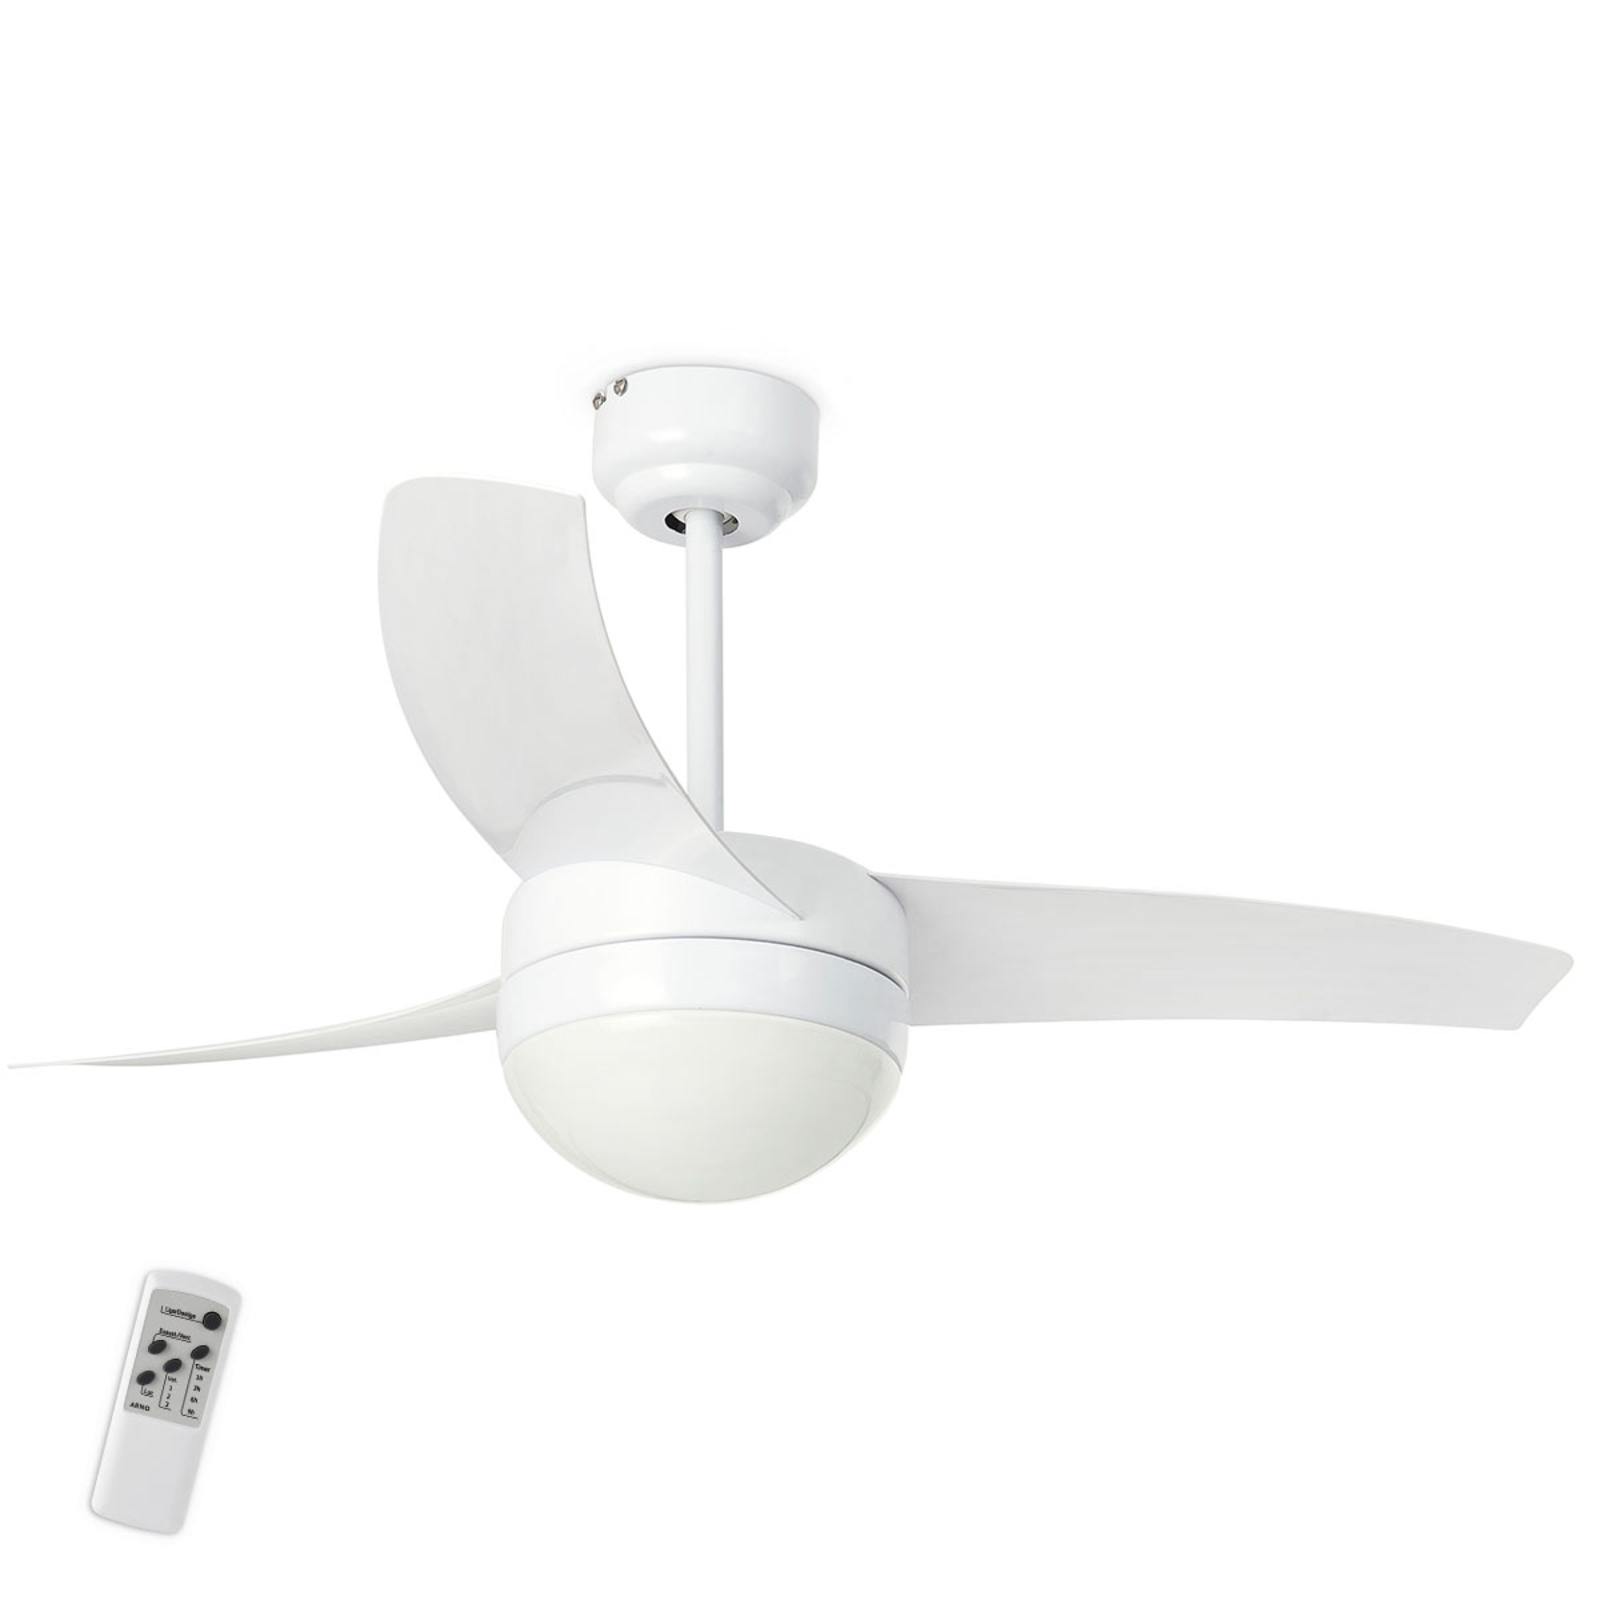 Easy ceiling fan with lighting, white